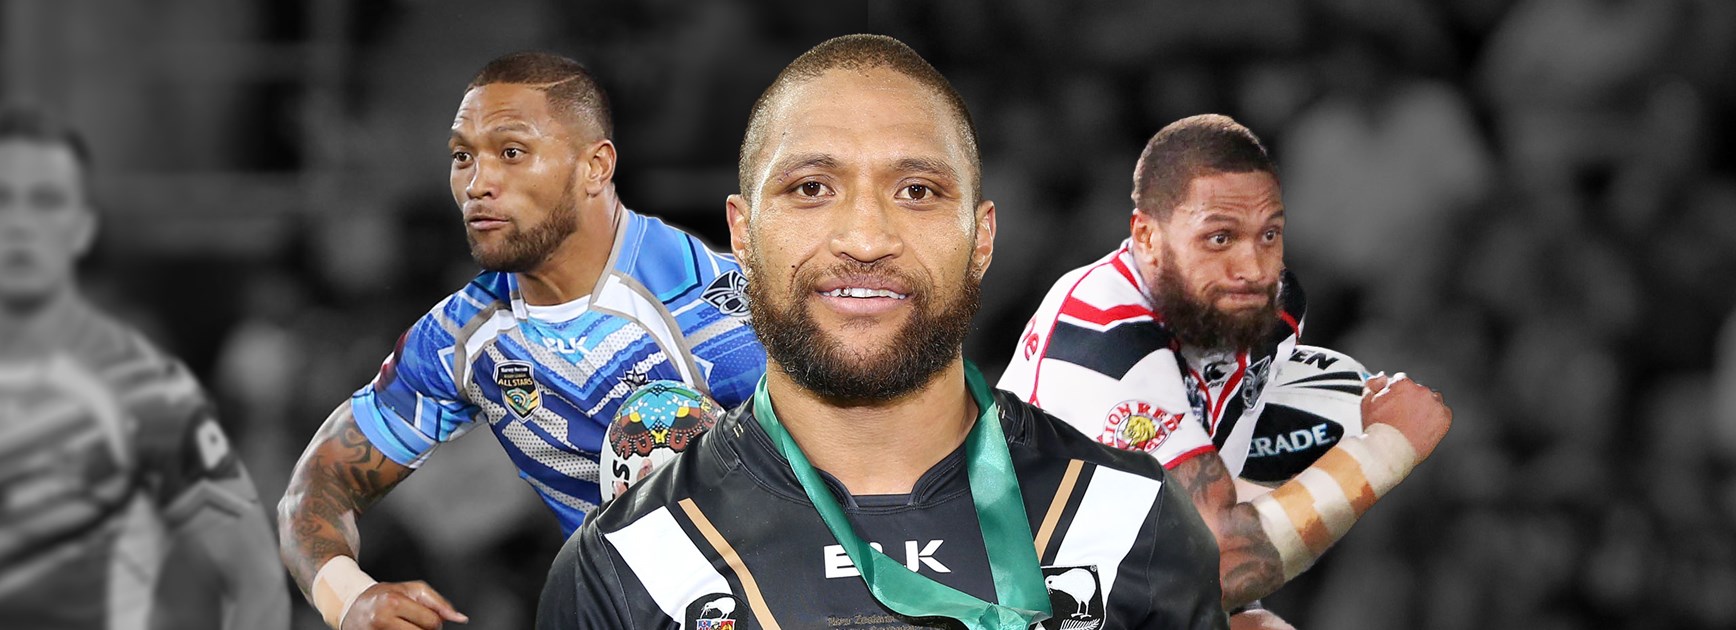 Manu Vatuvei diagnosed with brain cyst, may not play again | NRL.com